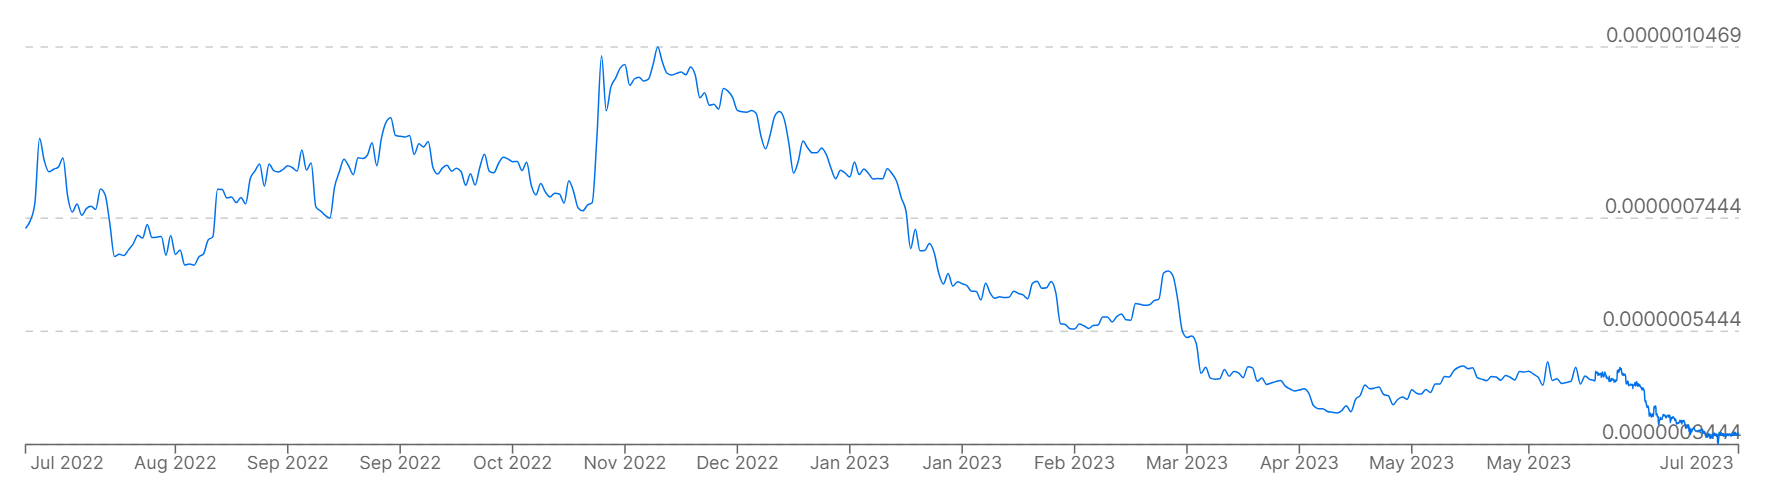 A chart showing Bitcoin prices against the Russian Ruble over the past 12 months.